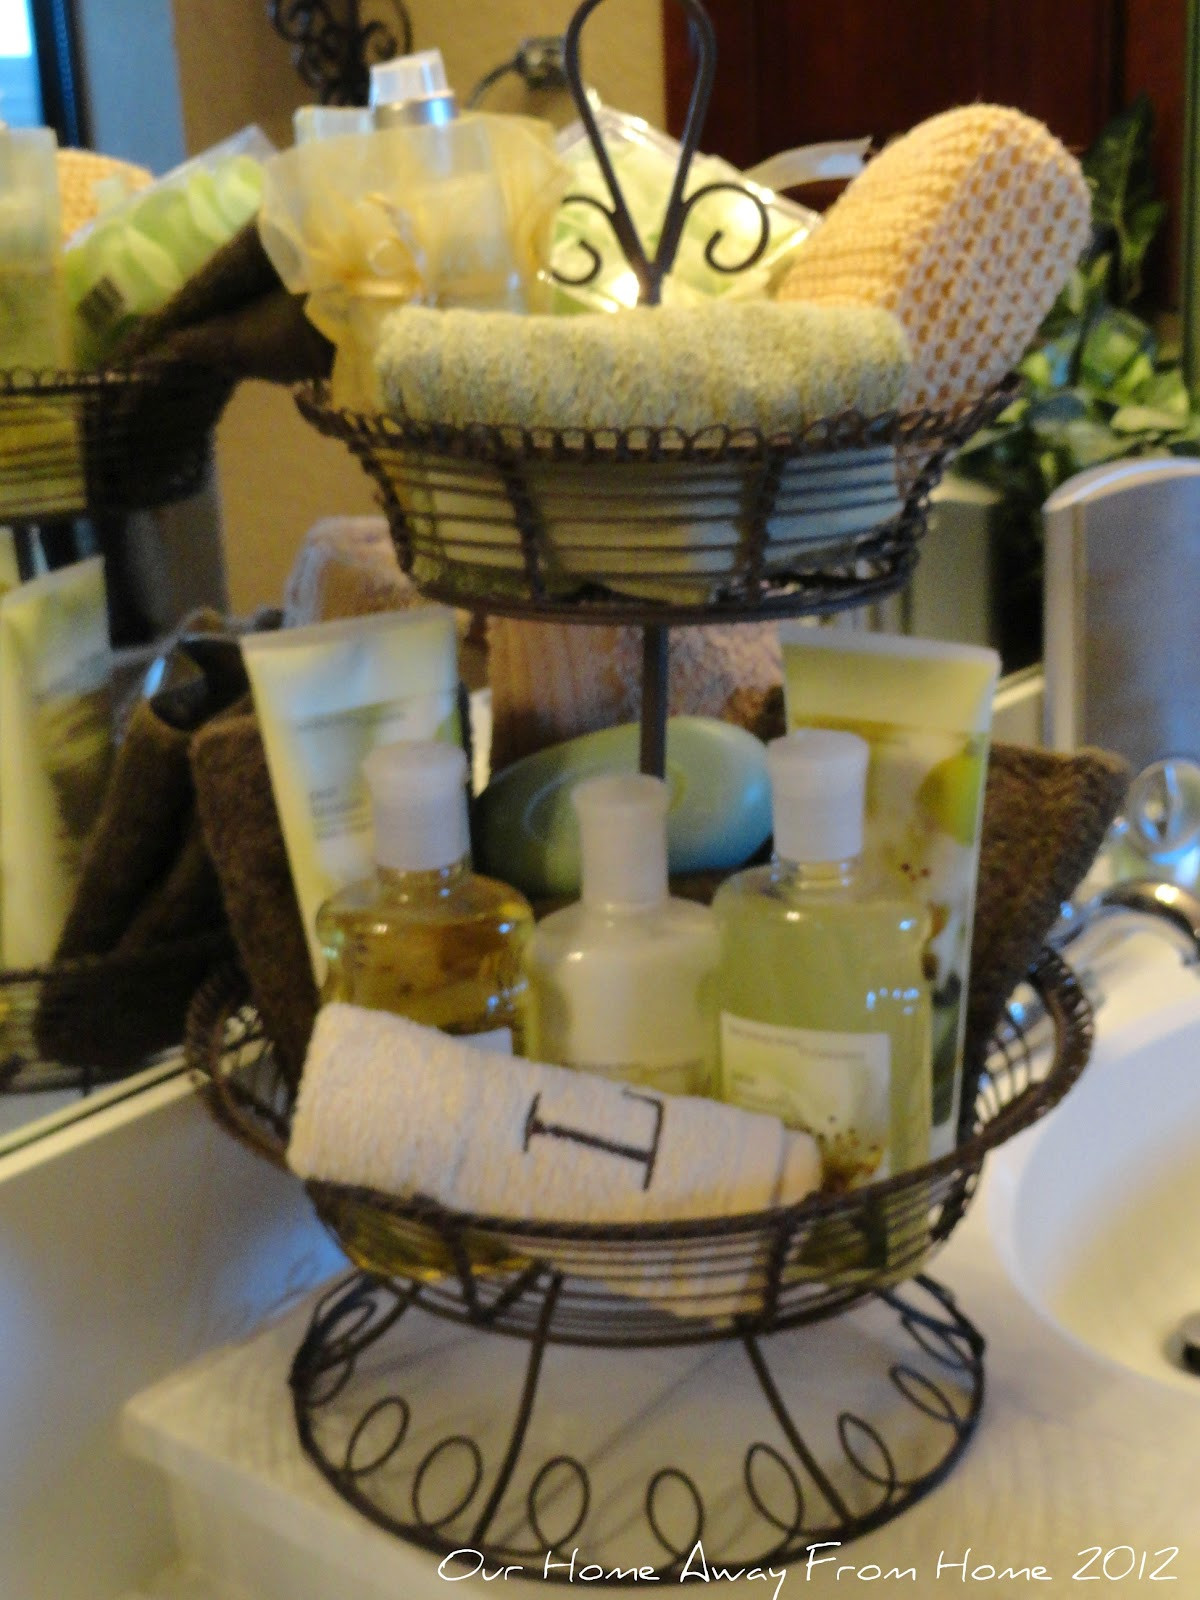 Bathroom Gift Basket Ideas
 Our Home Away From Home Tiered basket in the bathroom and